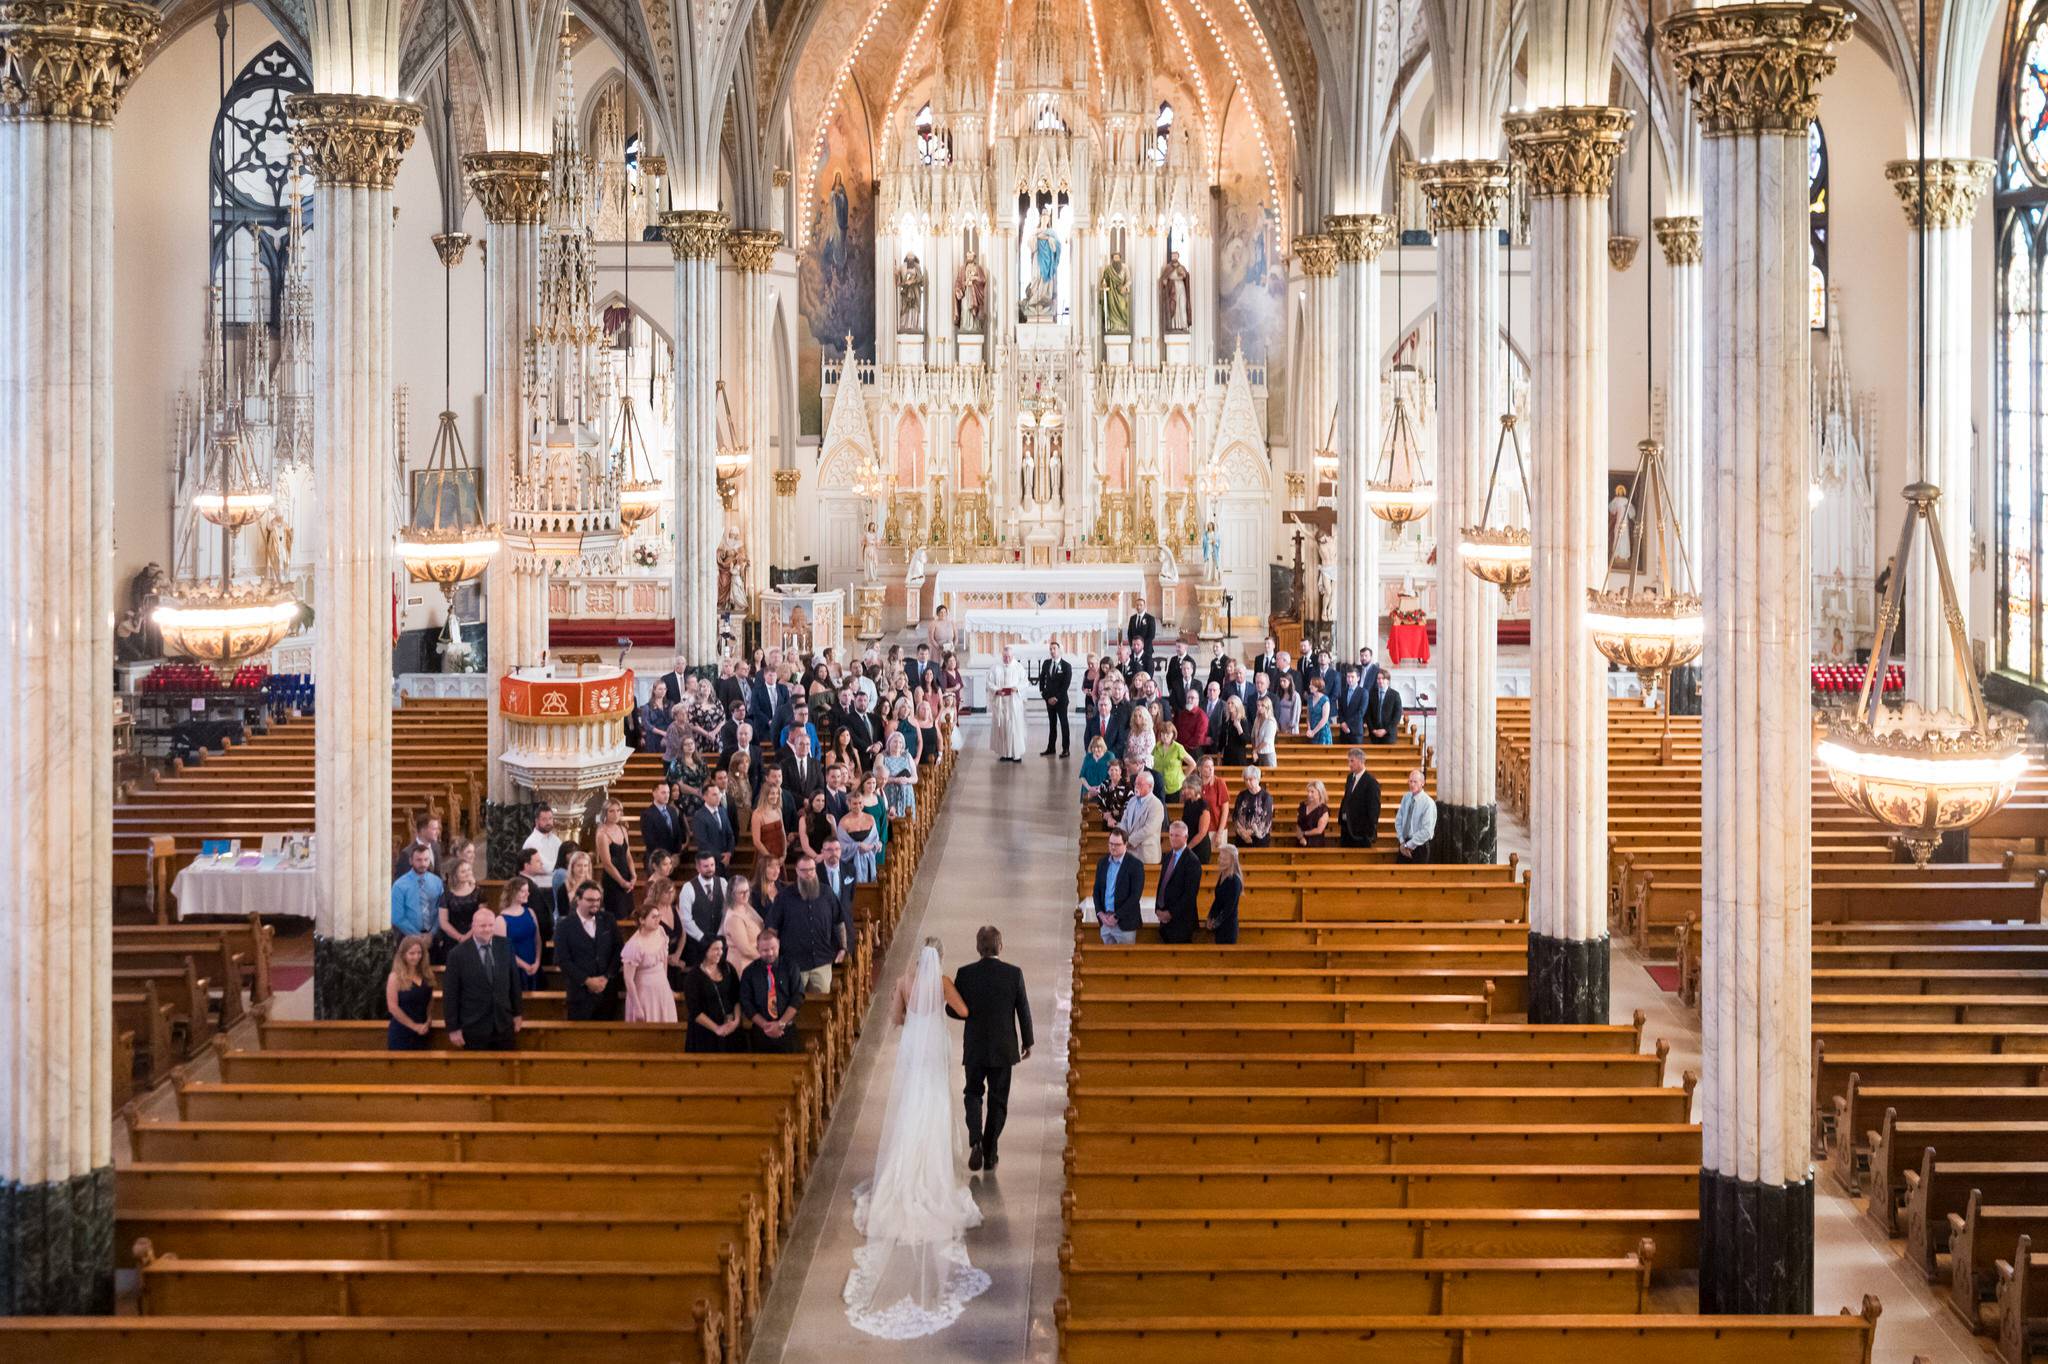 A balcony view of a bride walking down the aisle of her wedding at Detroit's Sweetest Heart of Mary Catholic Church.